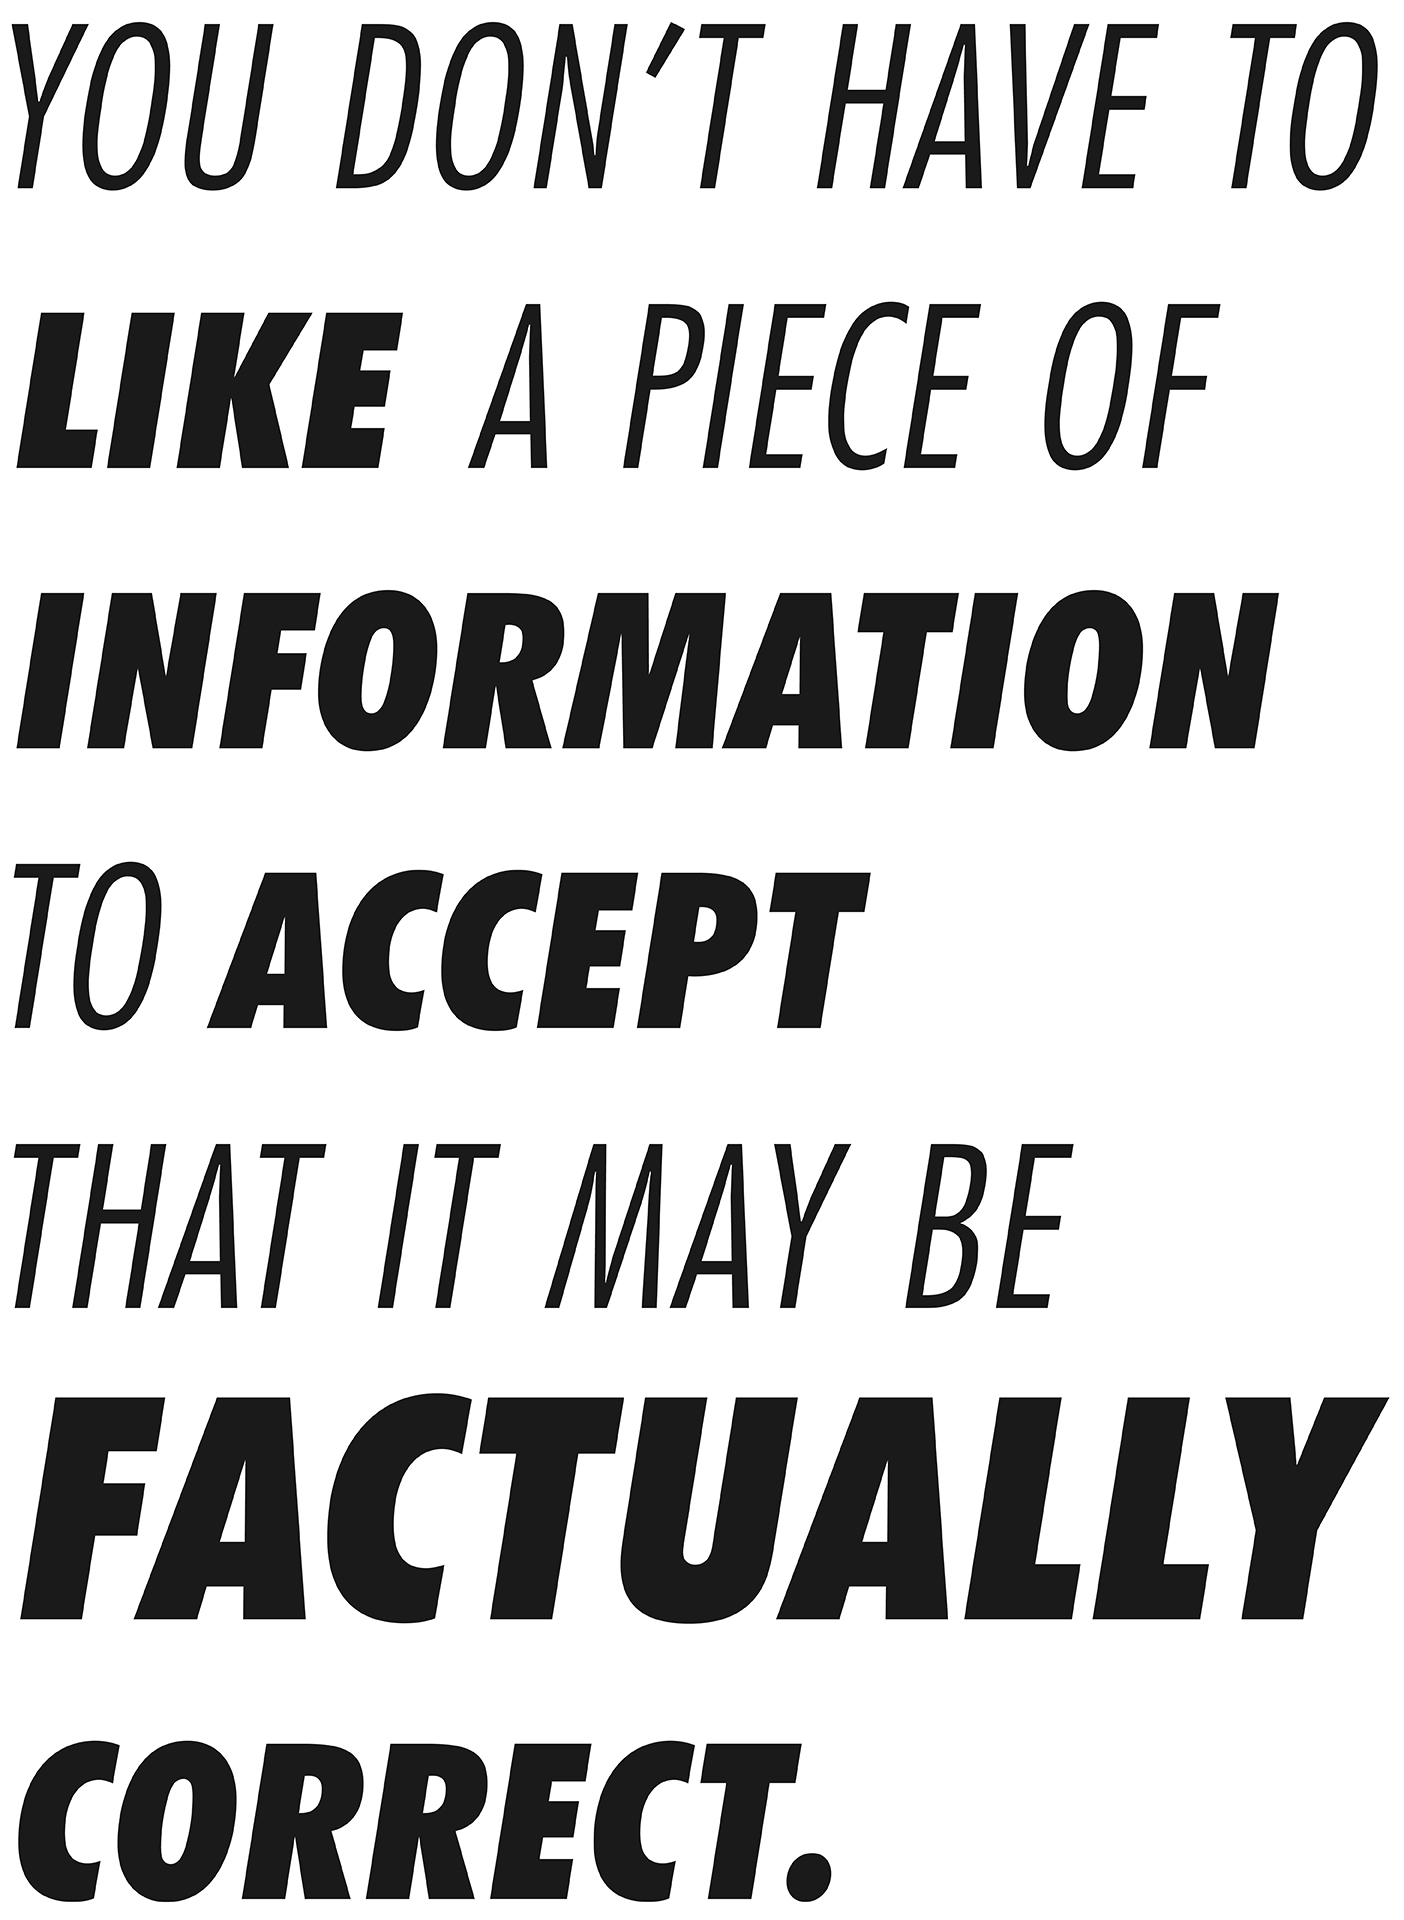 A graphic that reads "You don't have to like a piece of information to accept that it may be factually correct.